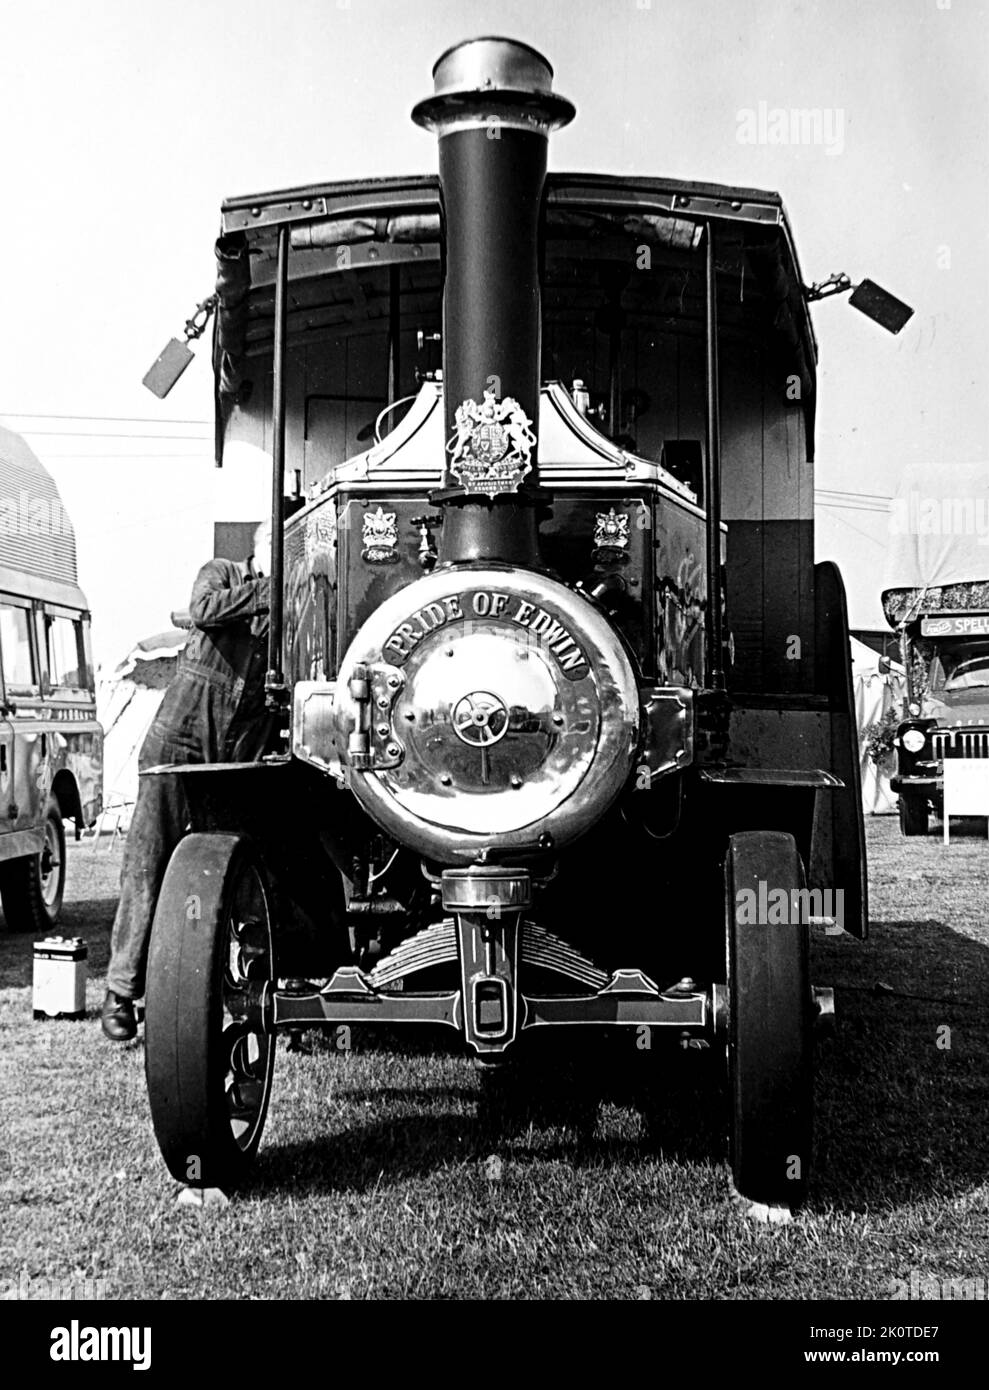 Foden Steam Wagon 'The Pride of Edwin' 1916. Foden Trucks was a British truck and bus manufacturing company which has its origins in Sandbach, Cheshire in 1856. 'Pride of Edwin' Works Number 6368. Registered 'M 8118' July 1916 new to The Portsmouth & Gosport Gas, Coke & Light Company. 5 ton Compound engined steam wagon Stock Photo